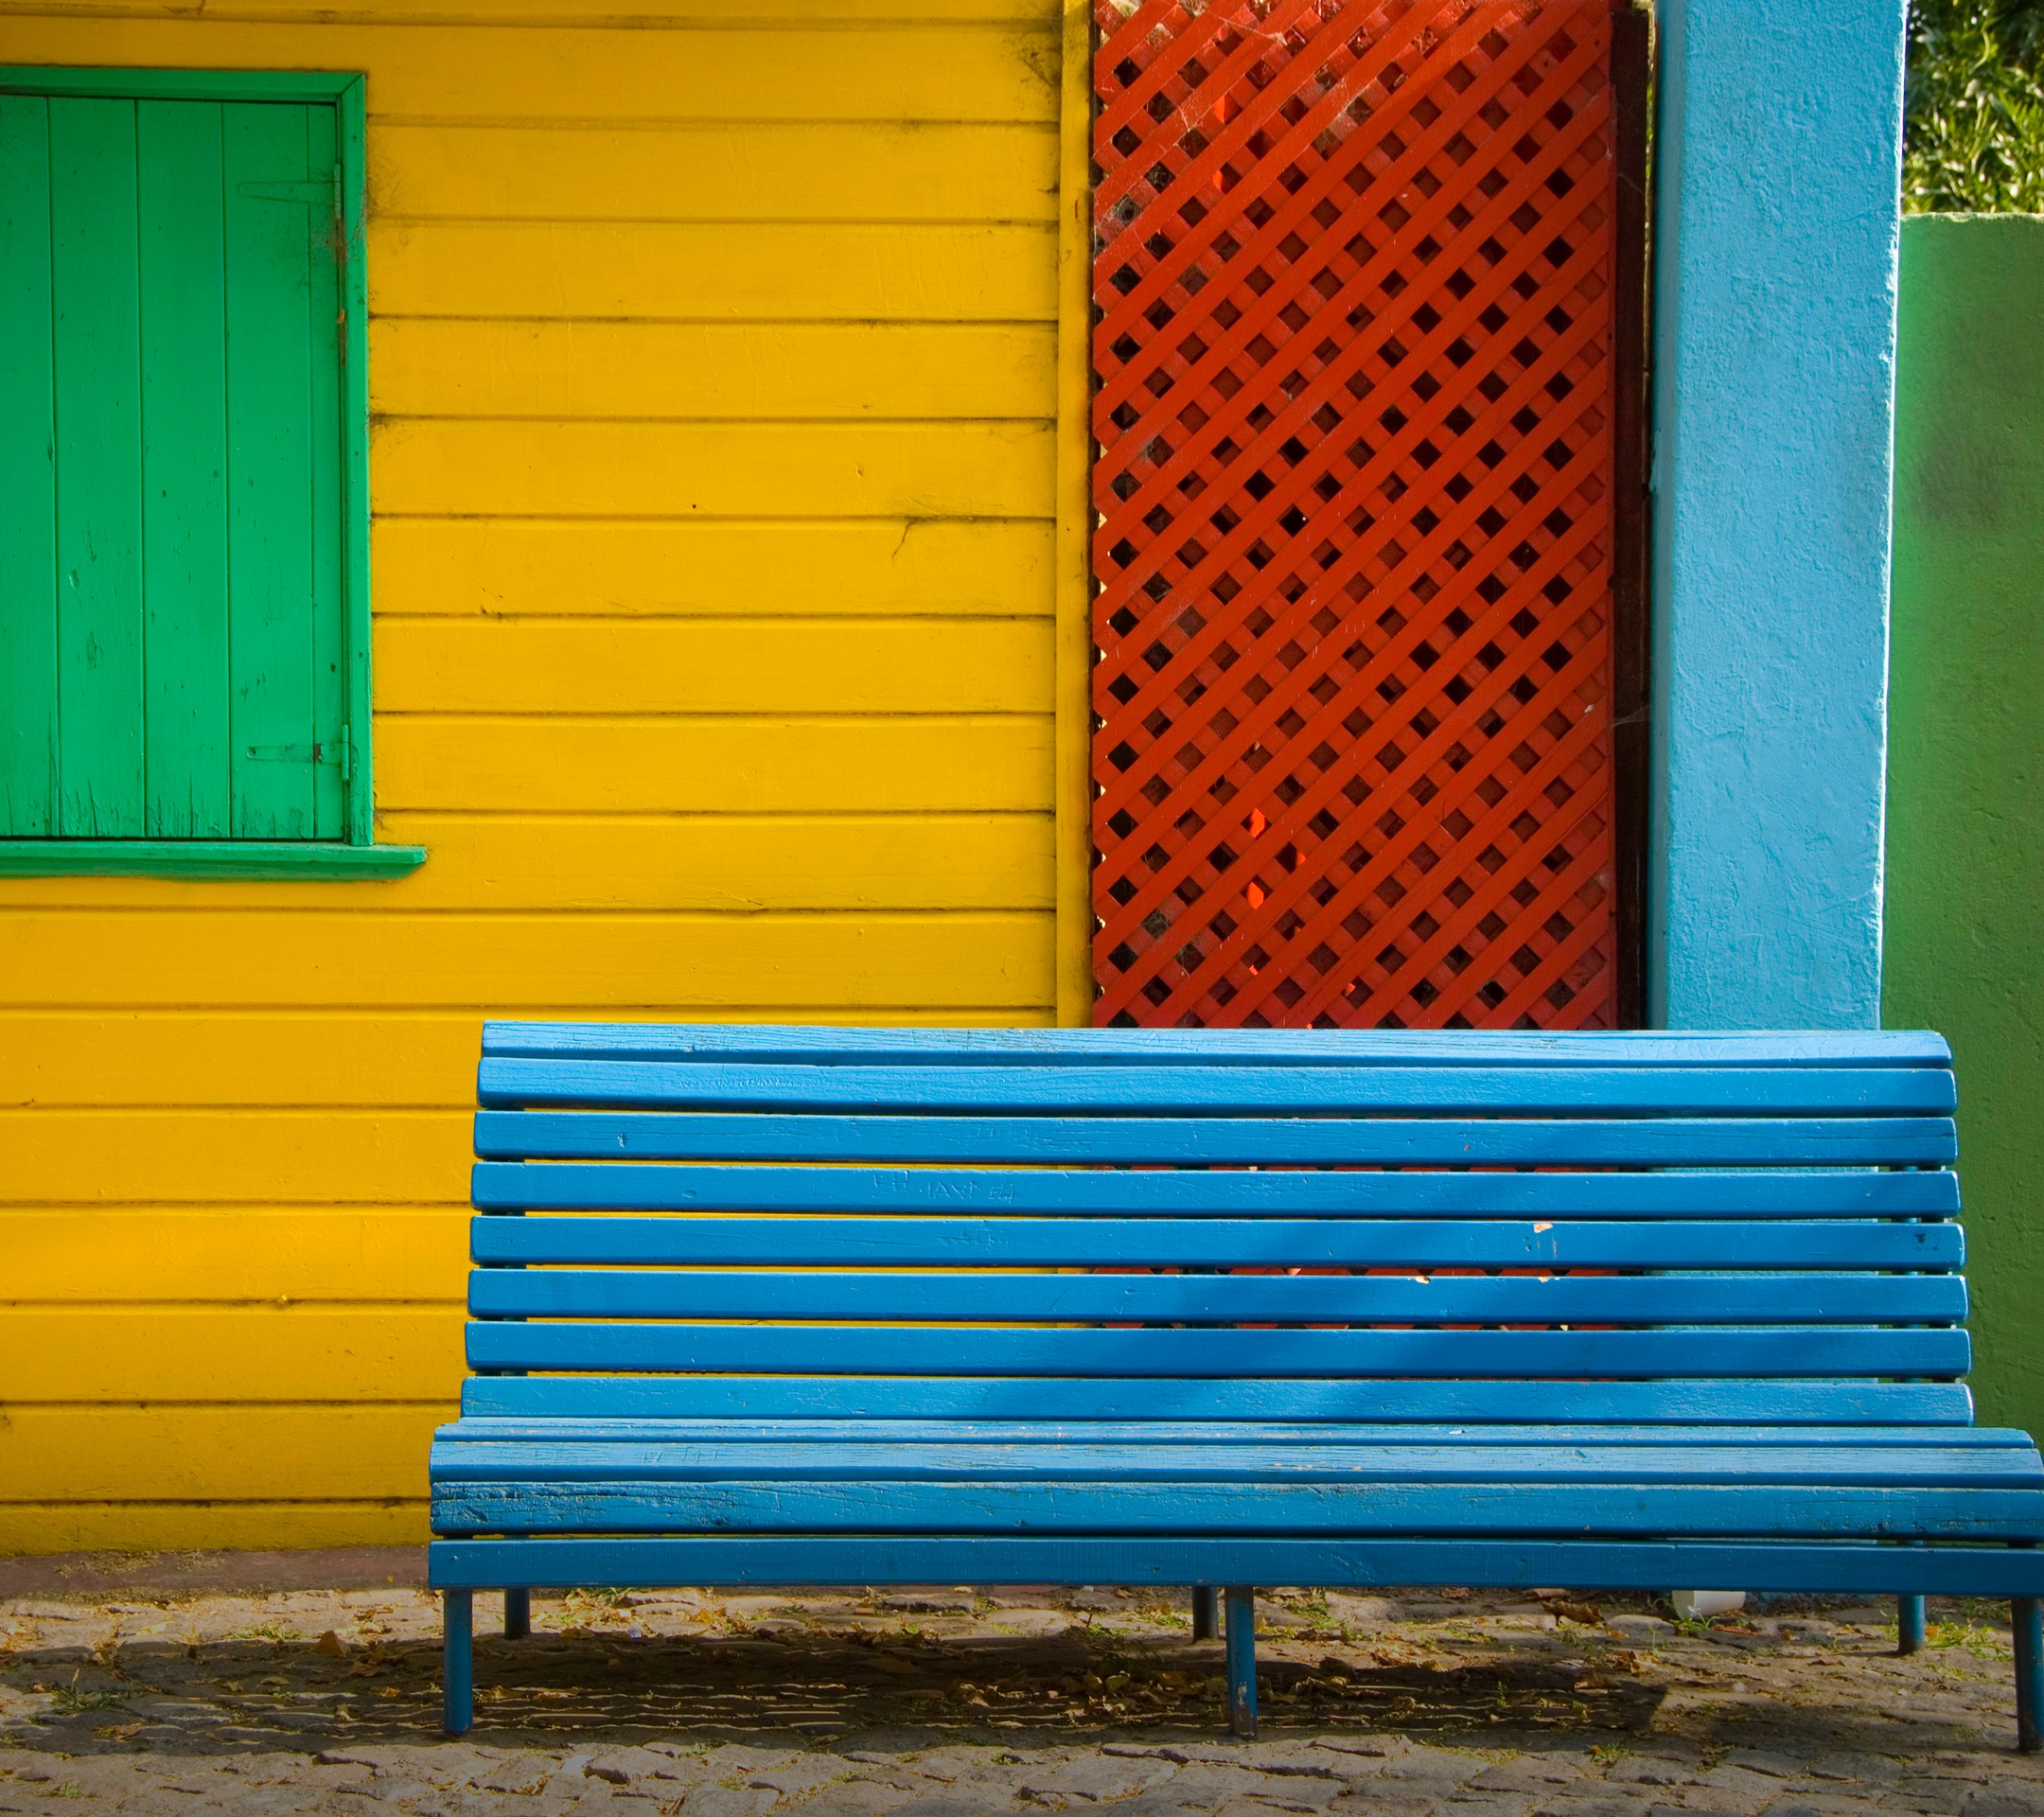 General 2160x1920 colorful bench outdoors blue green yellow red house